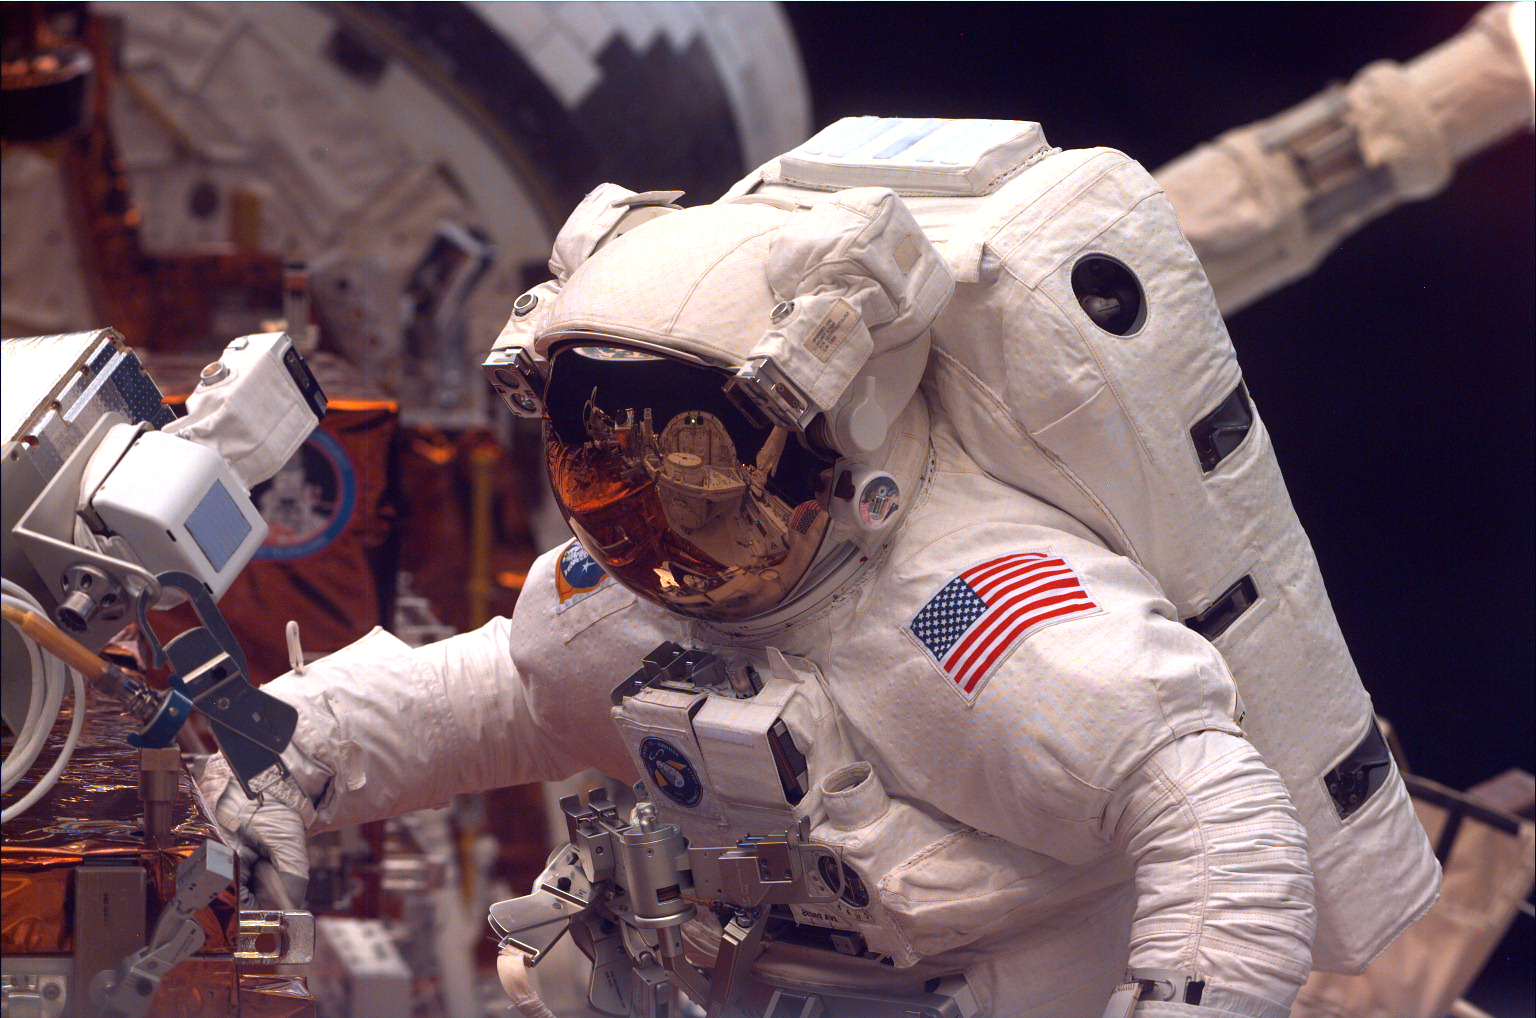 A closeup of an astronaut floating in the cargo bay.